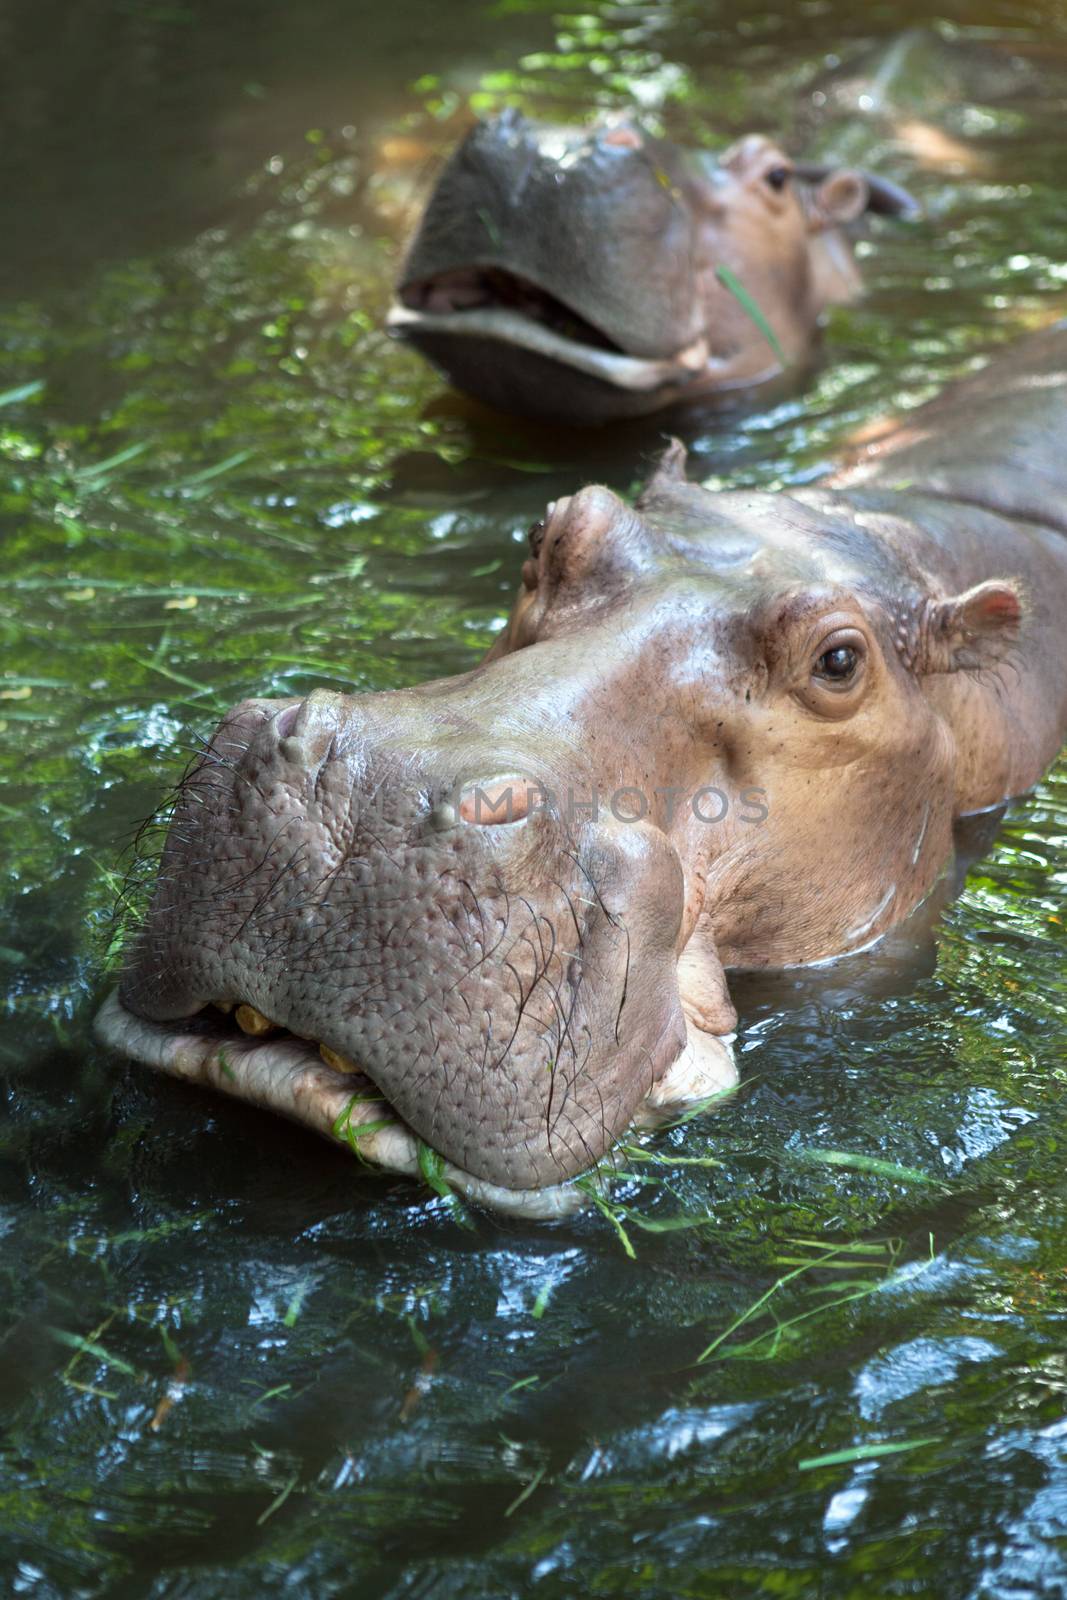 Close up view of nice Hippopotamus face coming out of water